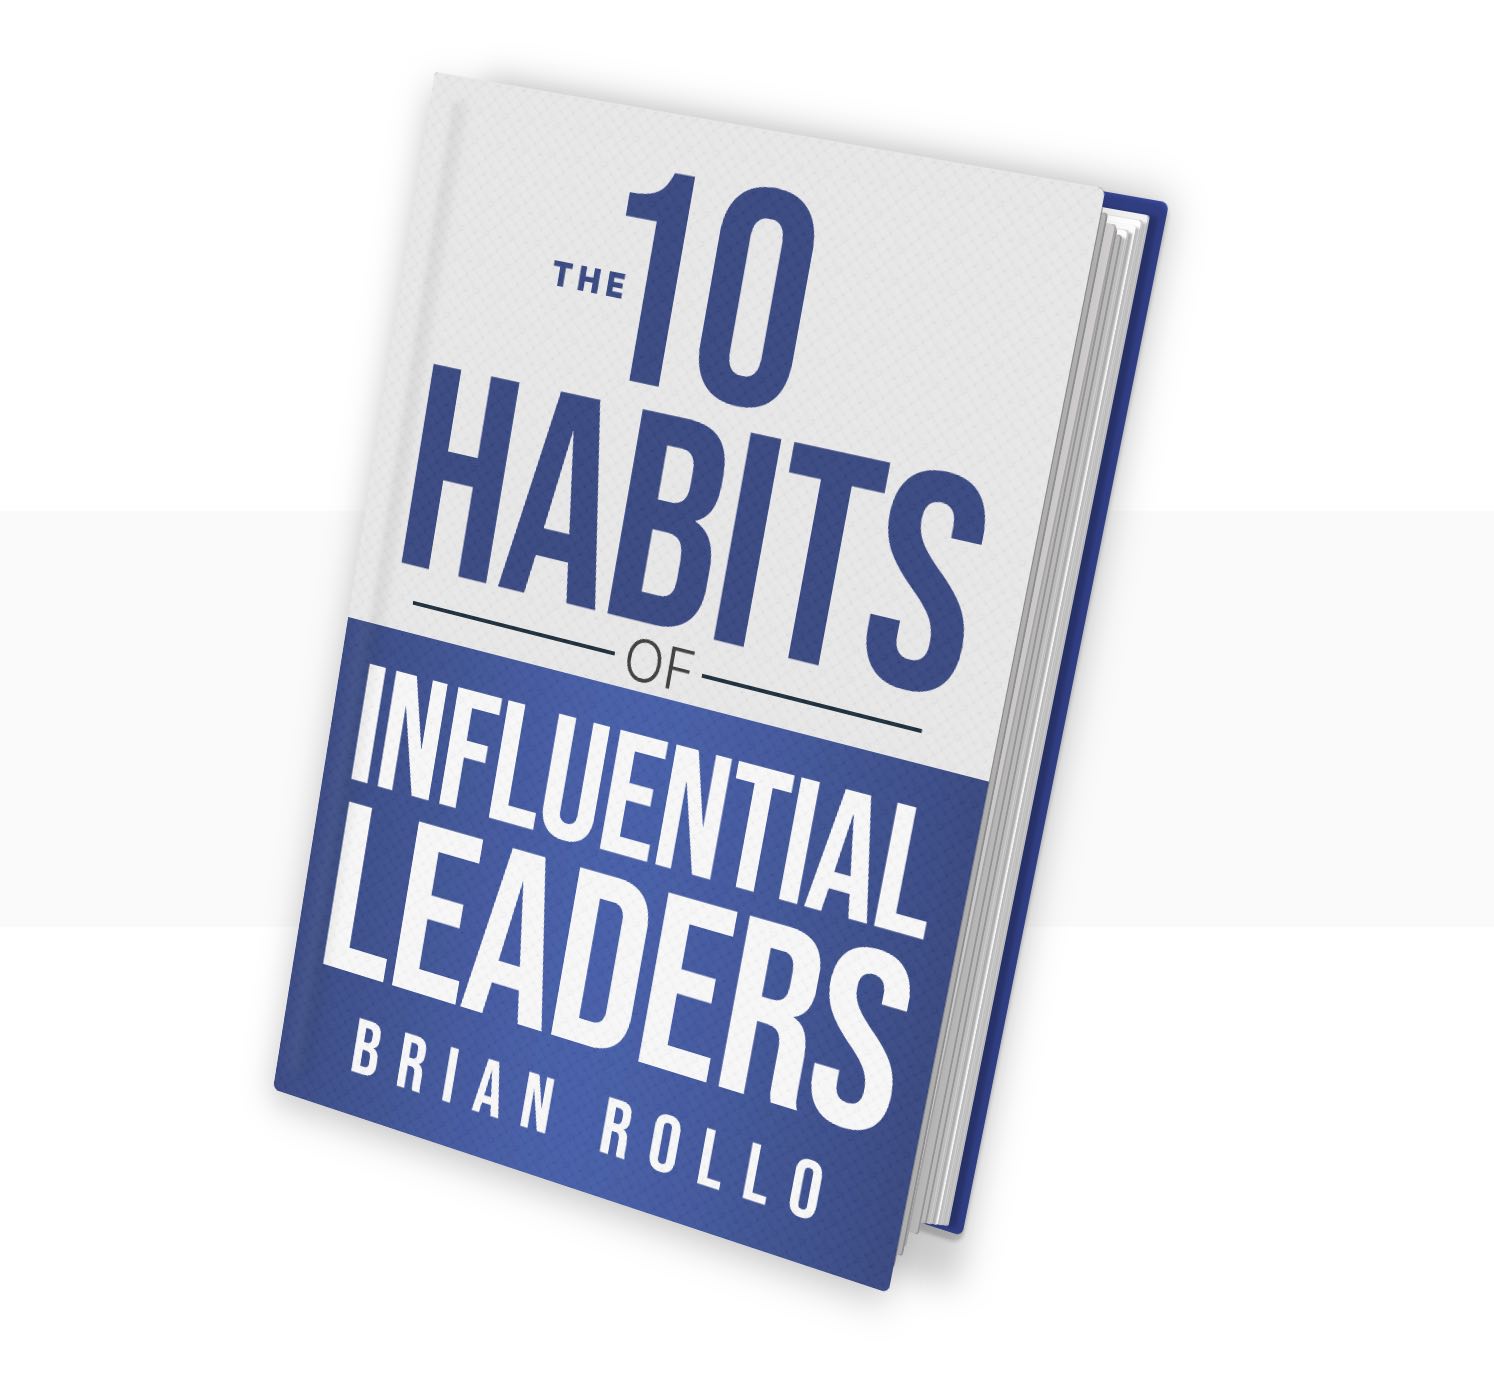 The 10 Habits of Influential Leaders book